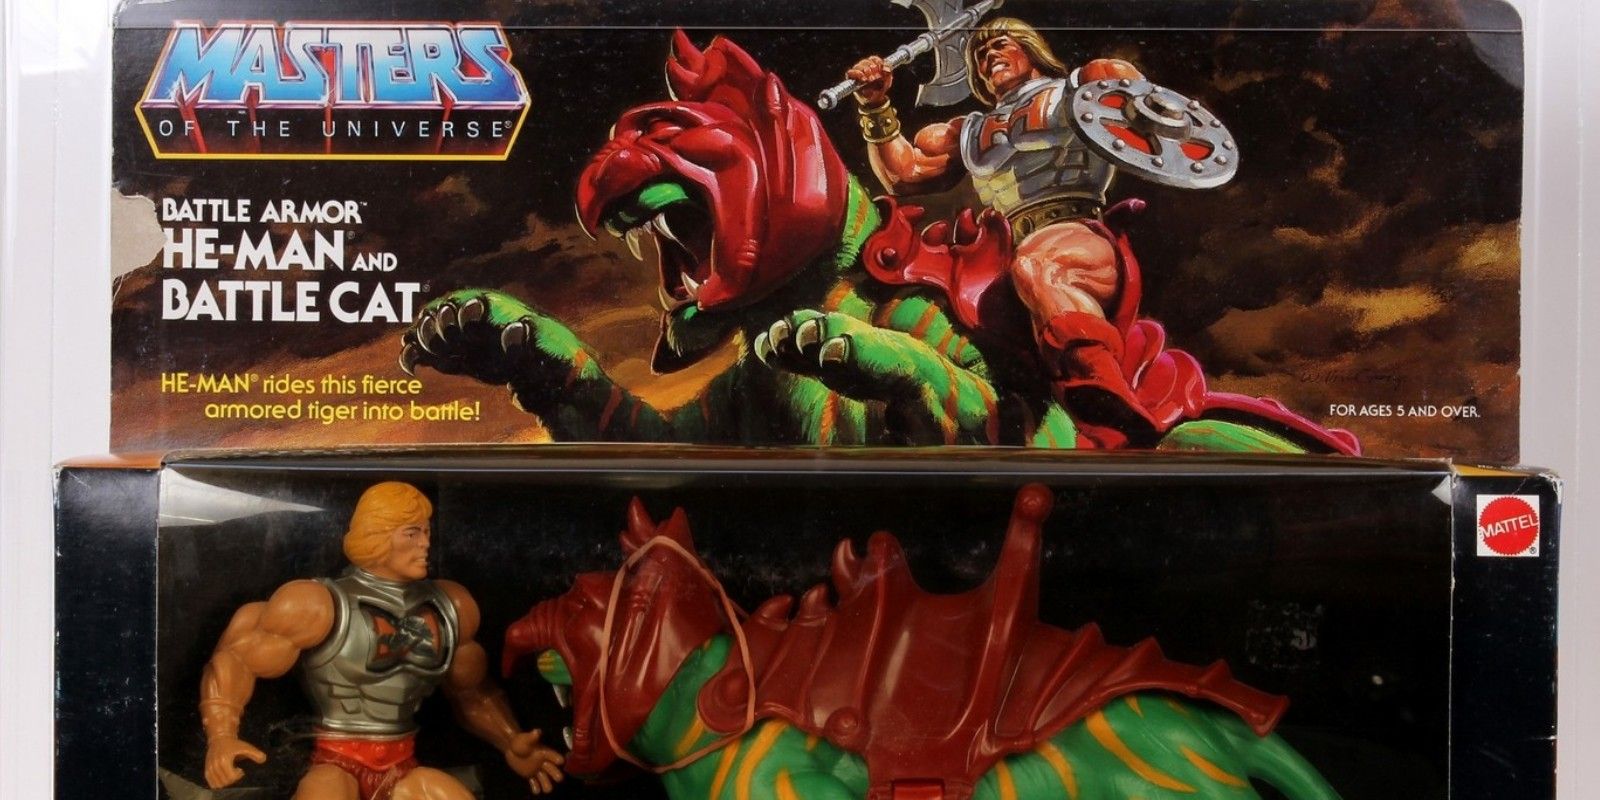 Battle Armor He-man and Battle Cat toybox